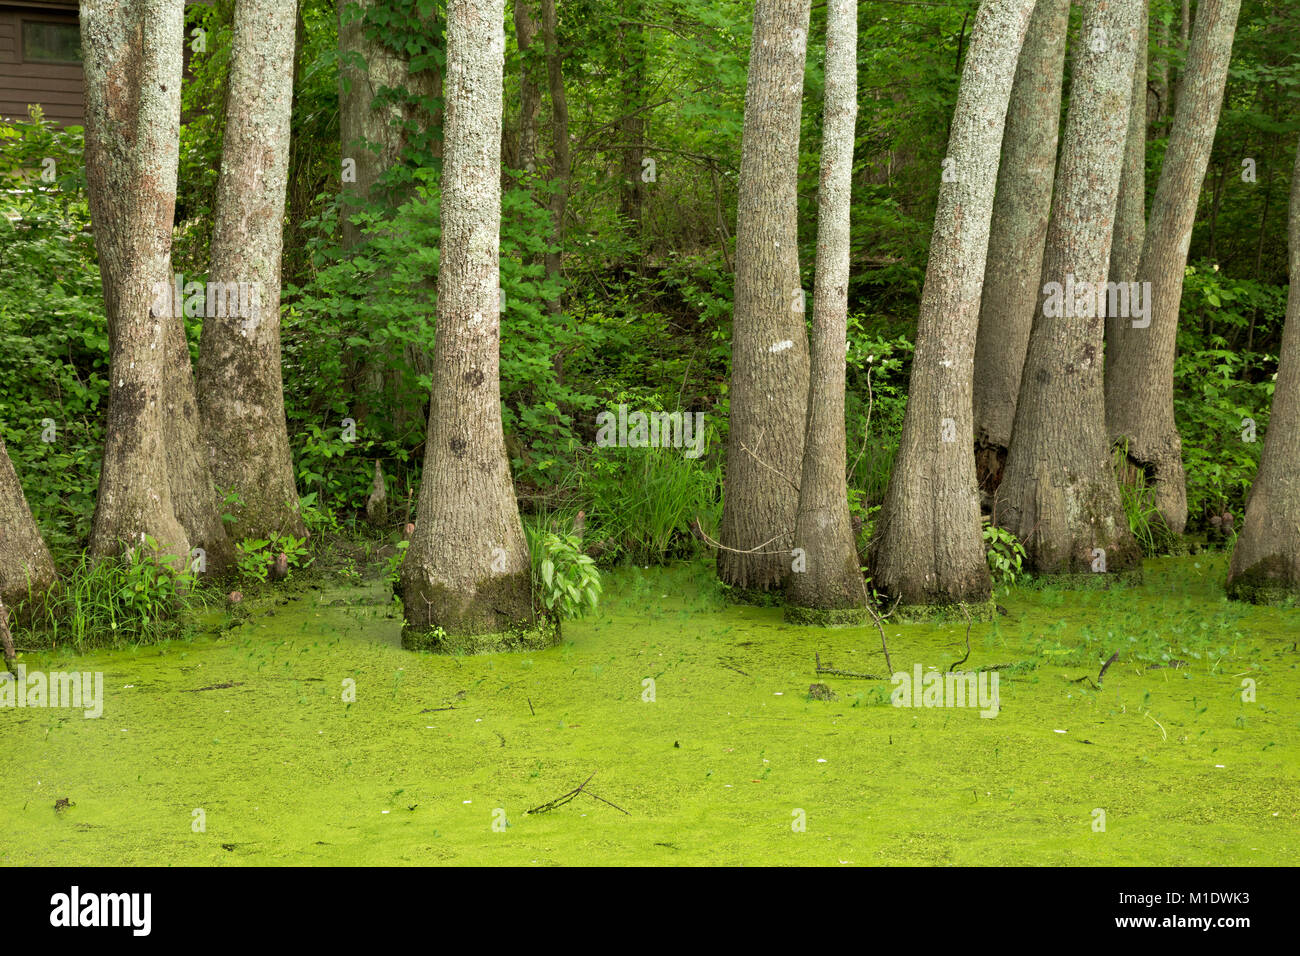 NC01499-00...NORTH CAROLINA - Bald cypress trees, with knees, and tupelo gum trees surrounded by a mat of duckweed in Merchant Millpond State Park. Stock Photo